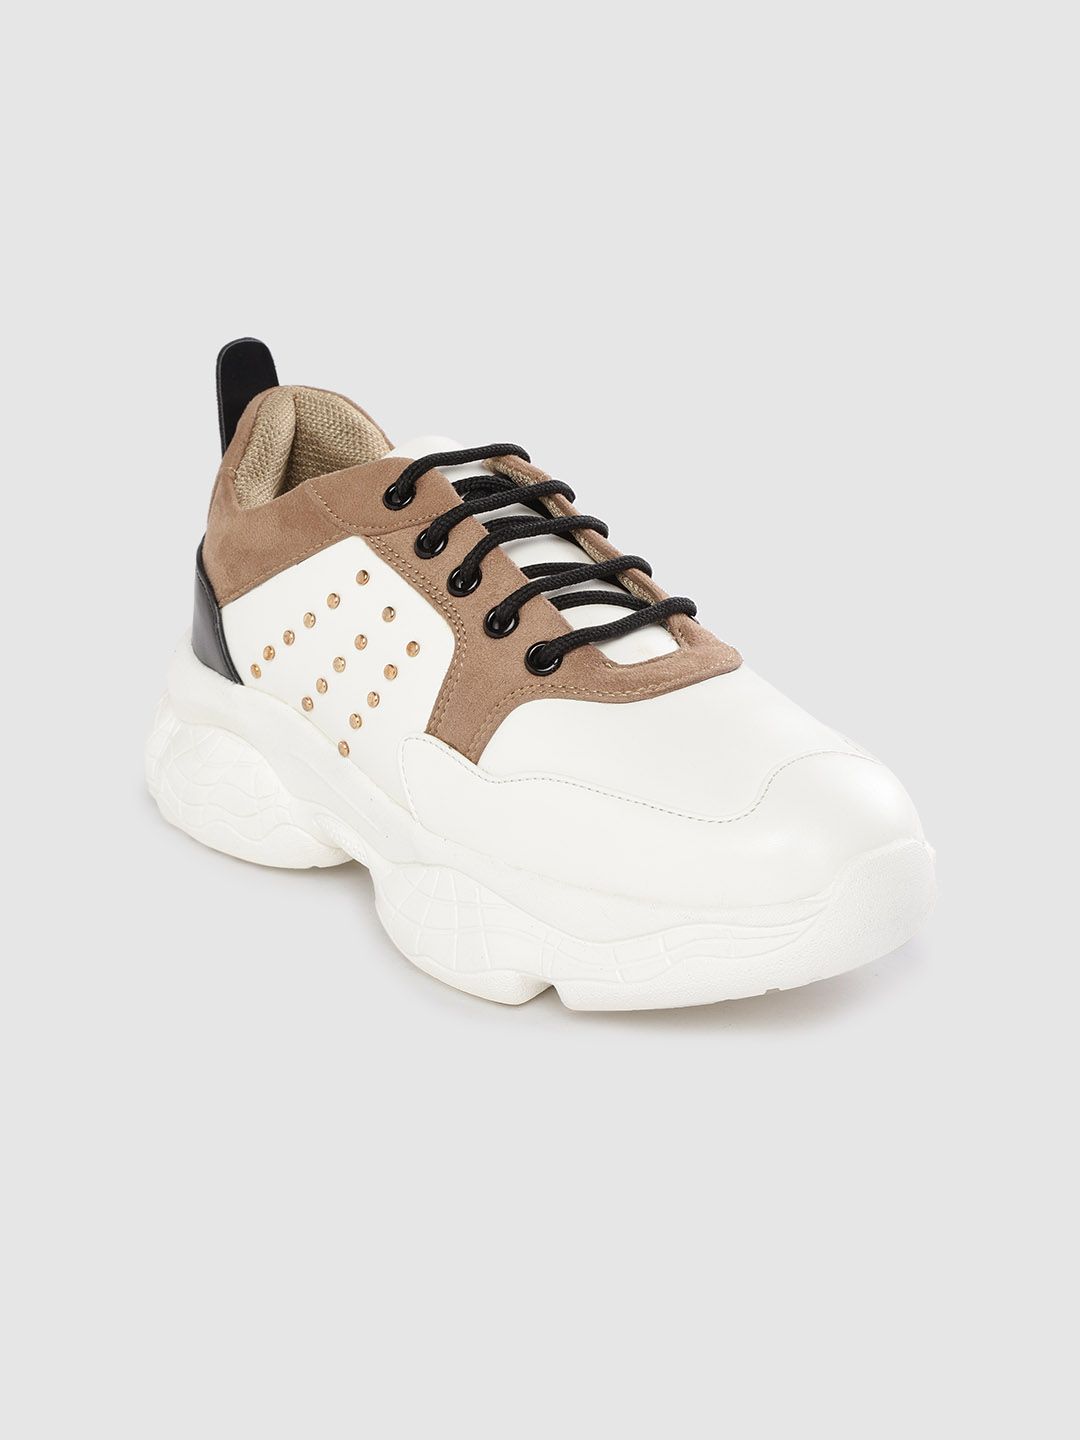 Roadster Women White & Brown Colourblocked Chunky Sneakers Price in India